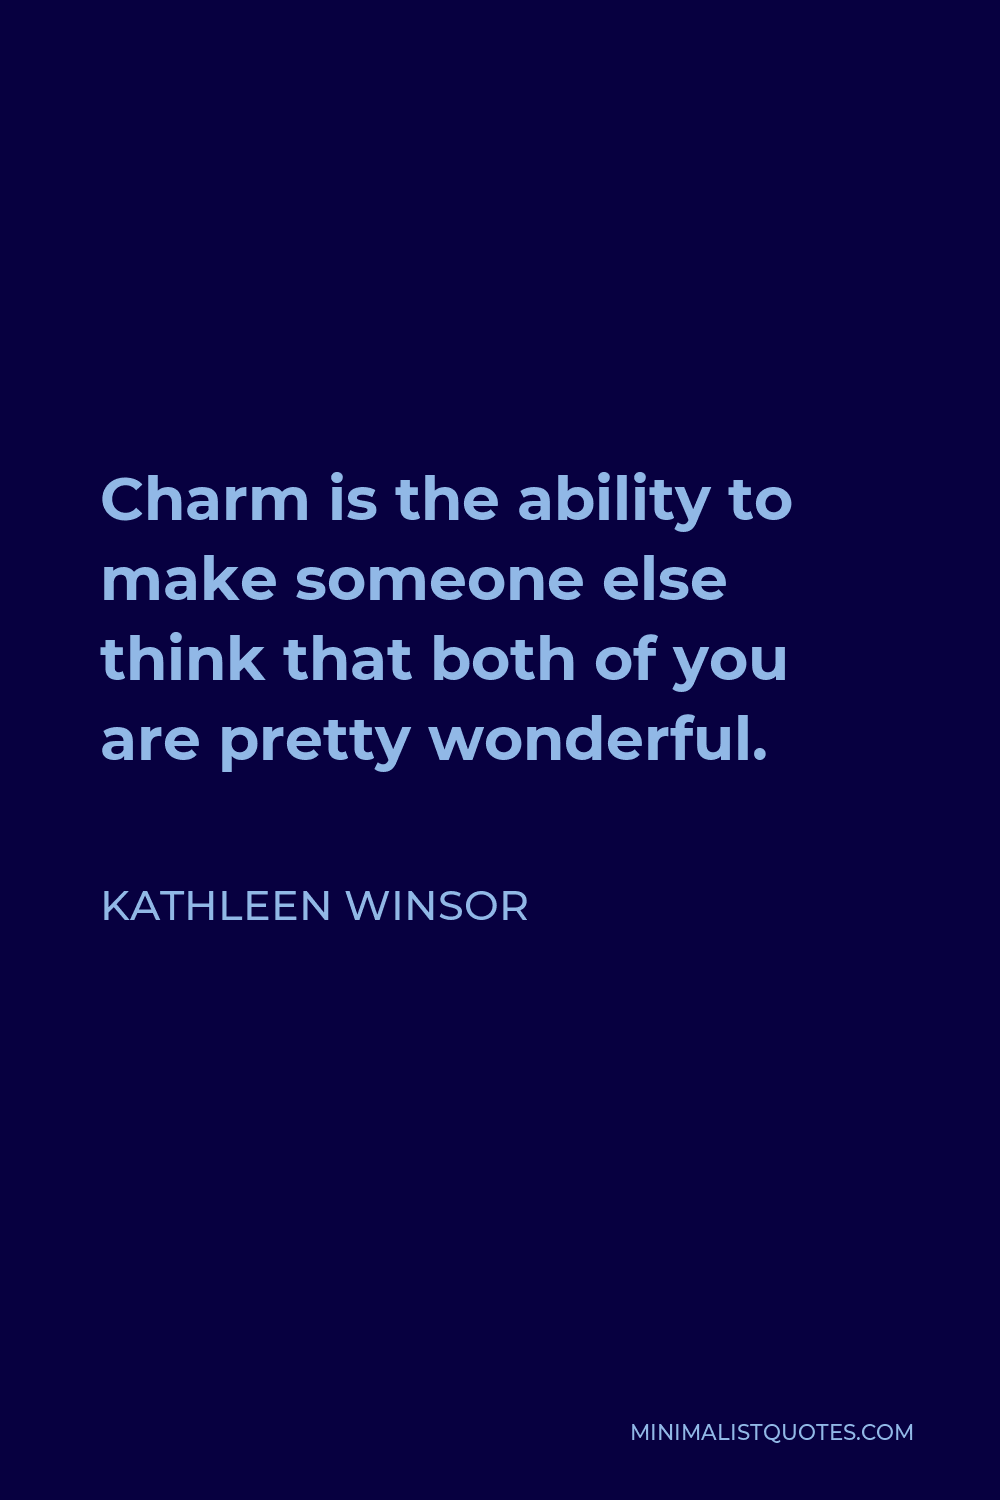 Kathleen Winsor Quote - Charm is the ability to make someone else think that both of you are pretty wonderful.